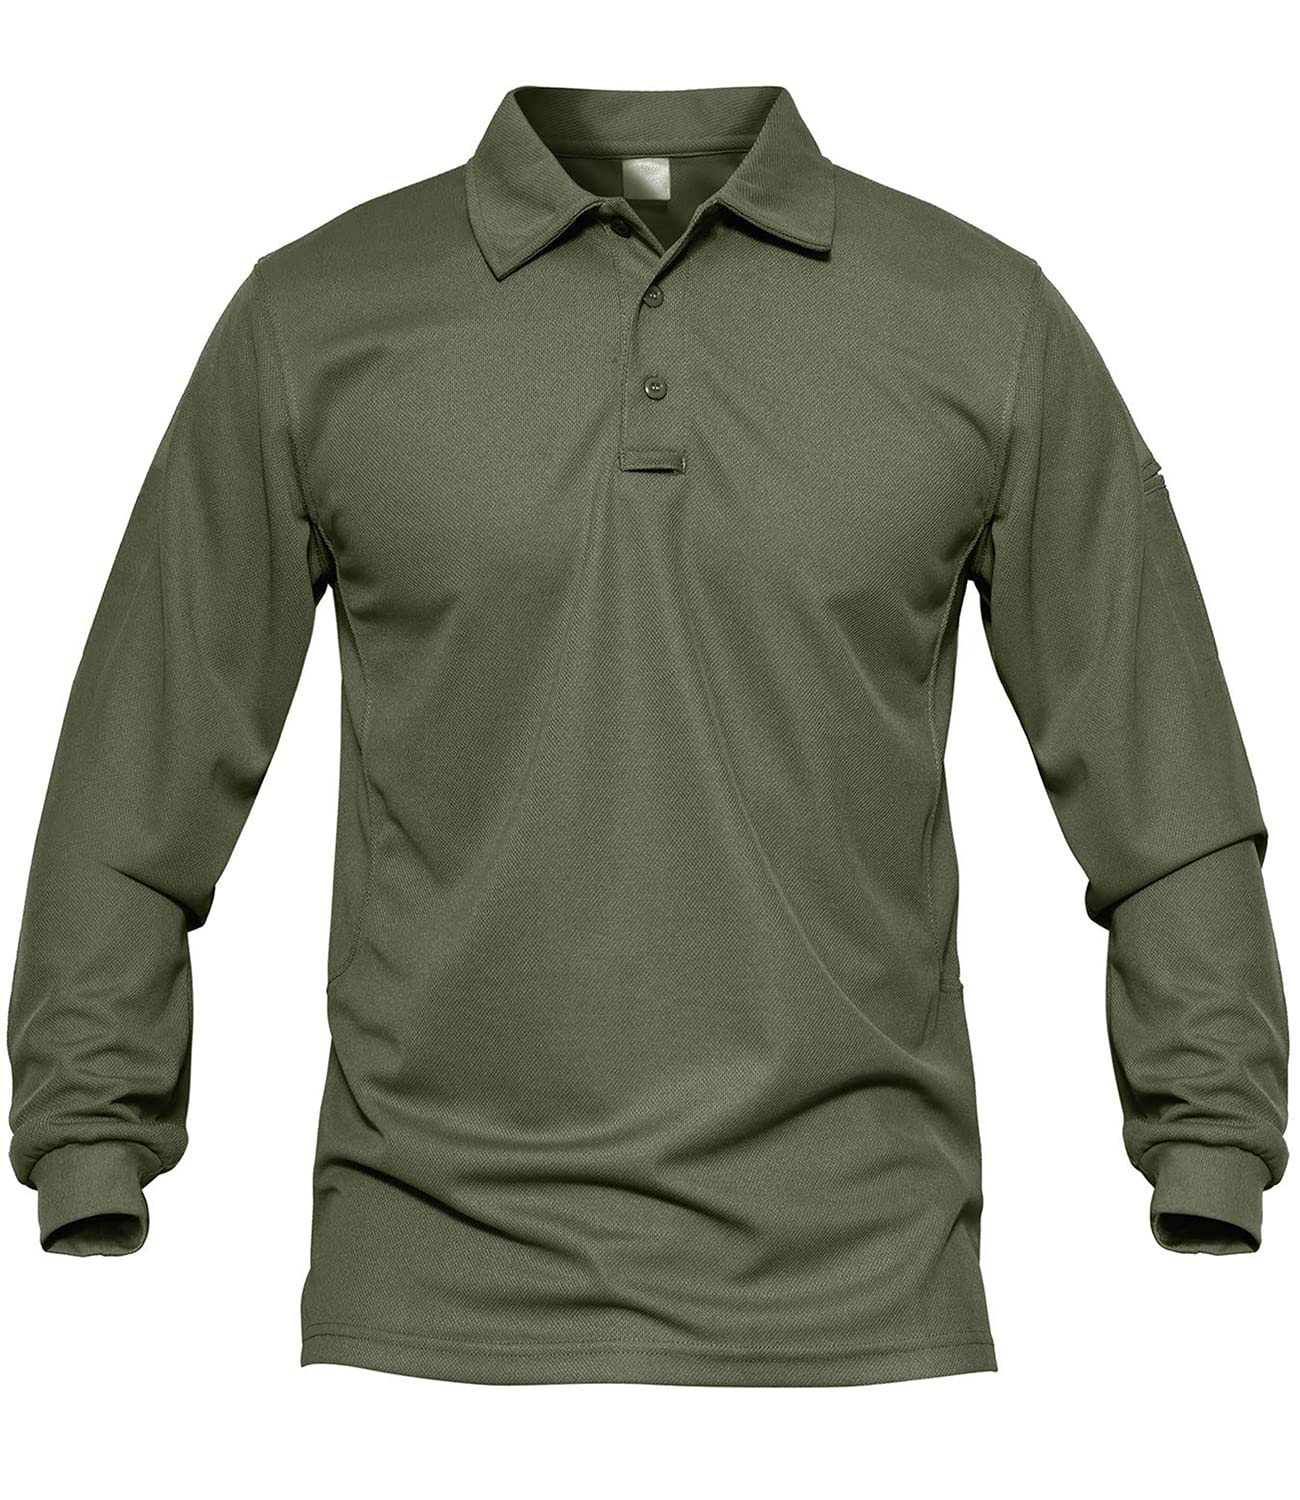 MAGCOMSEN Men's Quick Dry Long Sleeve Polo Shirts for Casual Military Golf Hiking